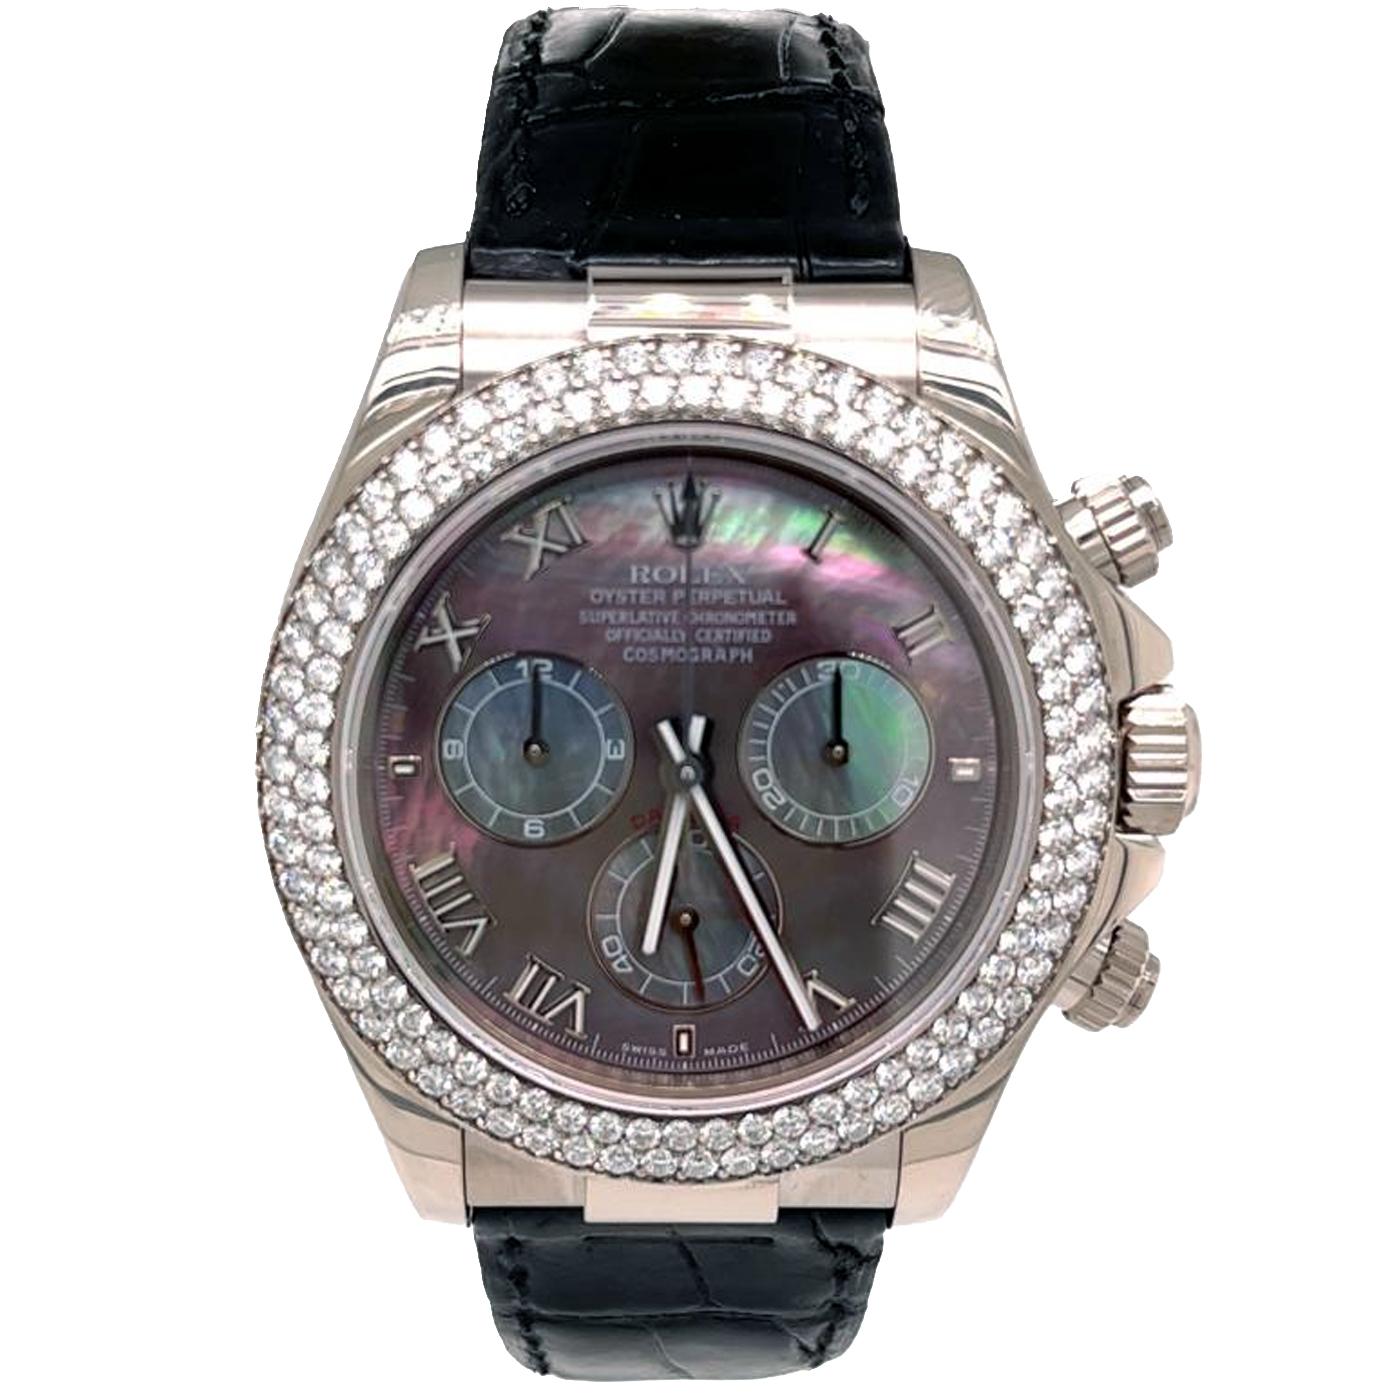 An Oyster Perpetual Daytona Gents Wristwatch, mother of pearl dial set with round brilliant cut diamond hour markers, a fixed 18k white gold bezel set with approximately 124 round cut diamonds, an original Black leather strap with an oyster lock